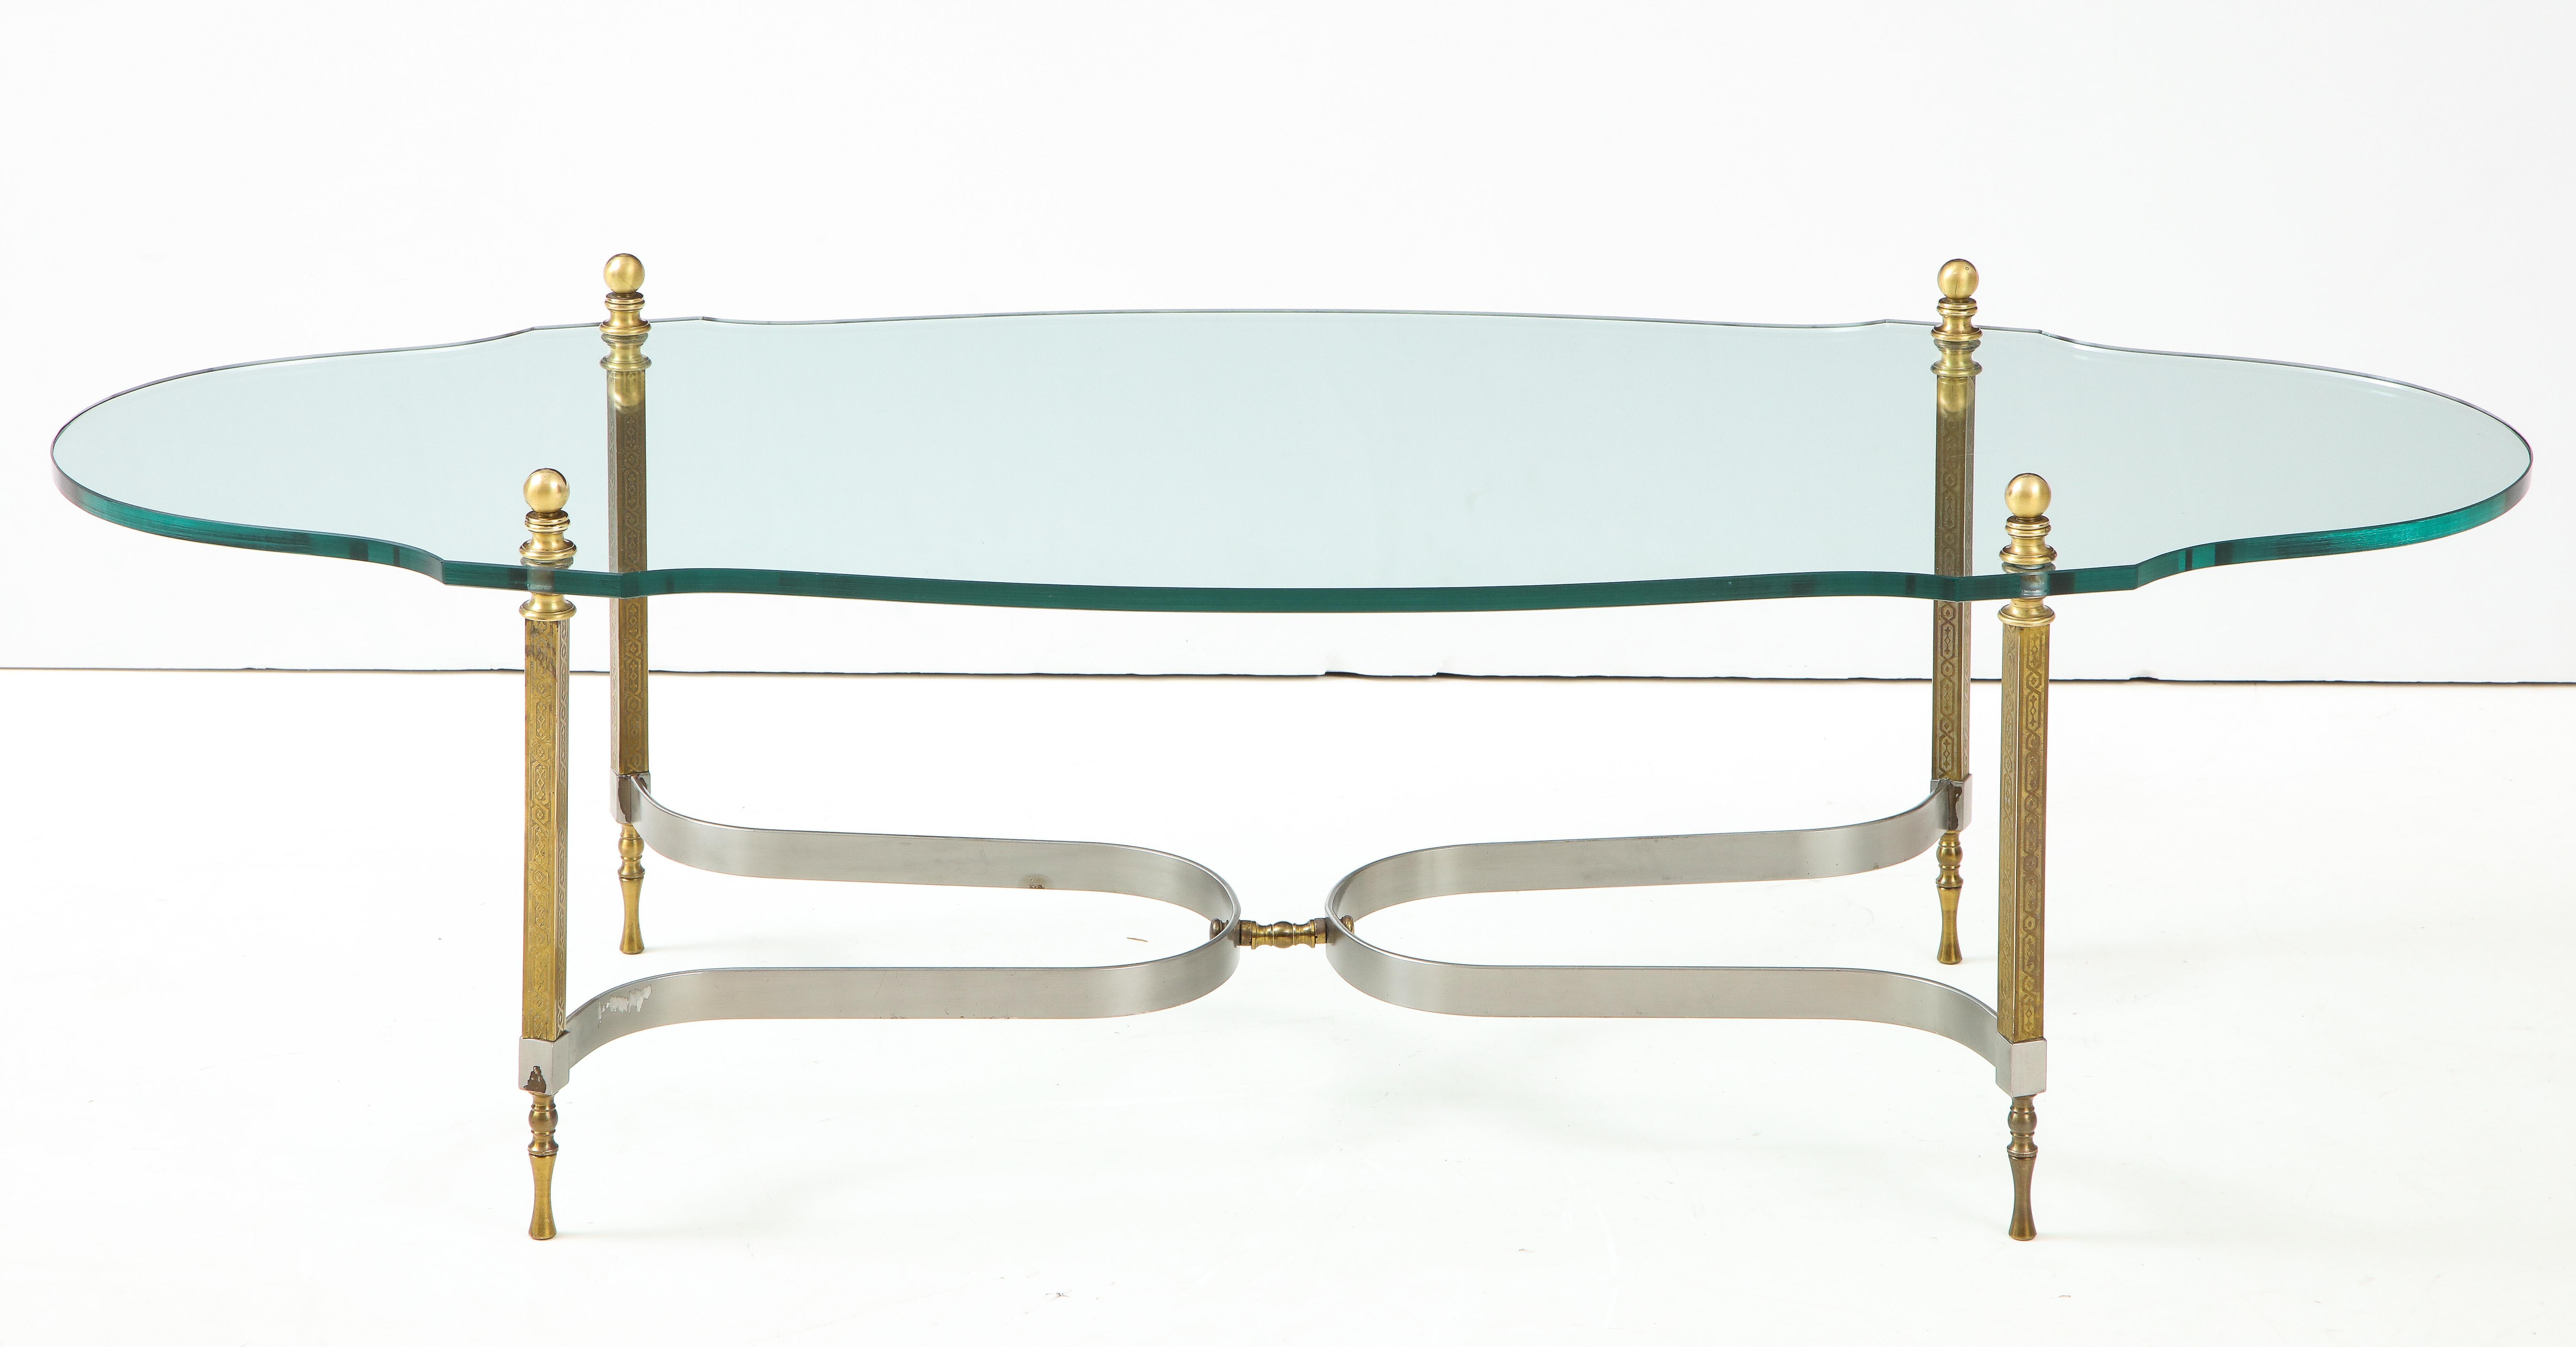 1960s modern brass and steel base with glass top coffee table attributed to Maison Jansen.